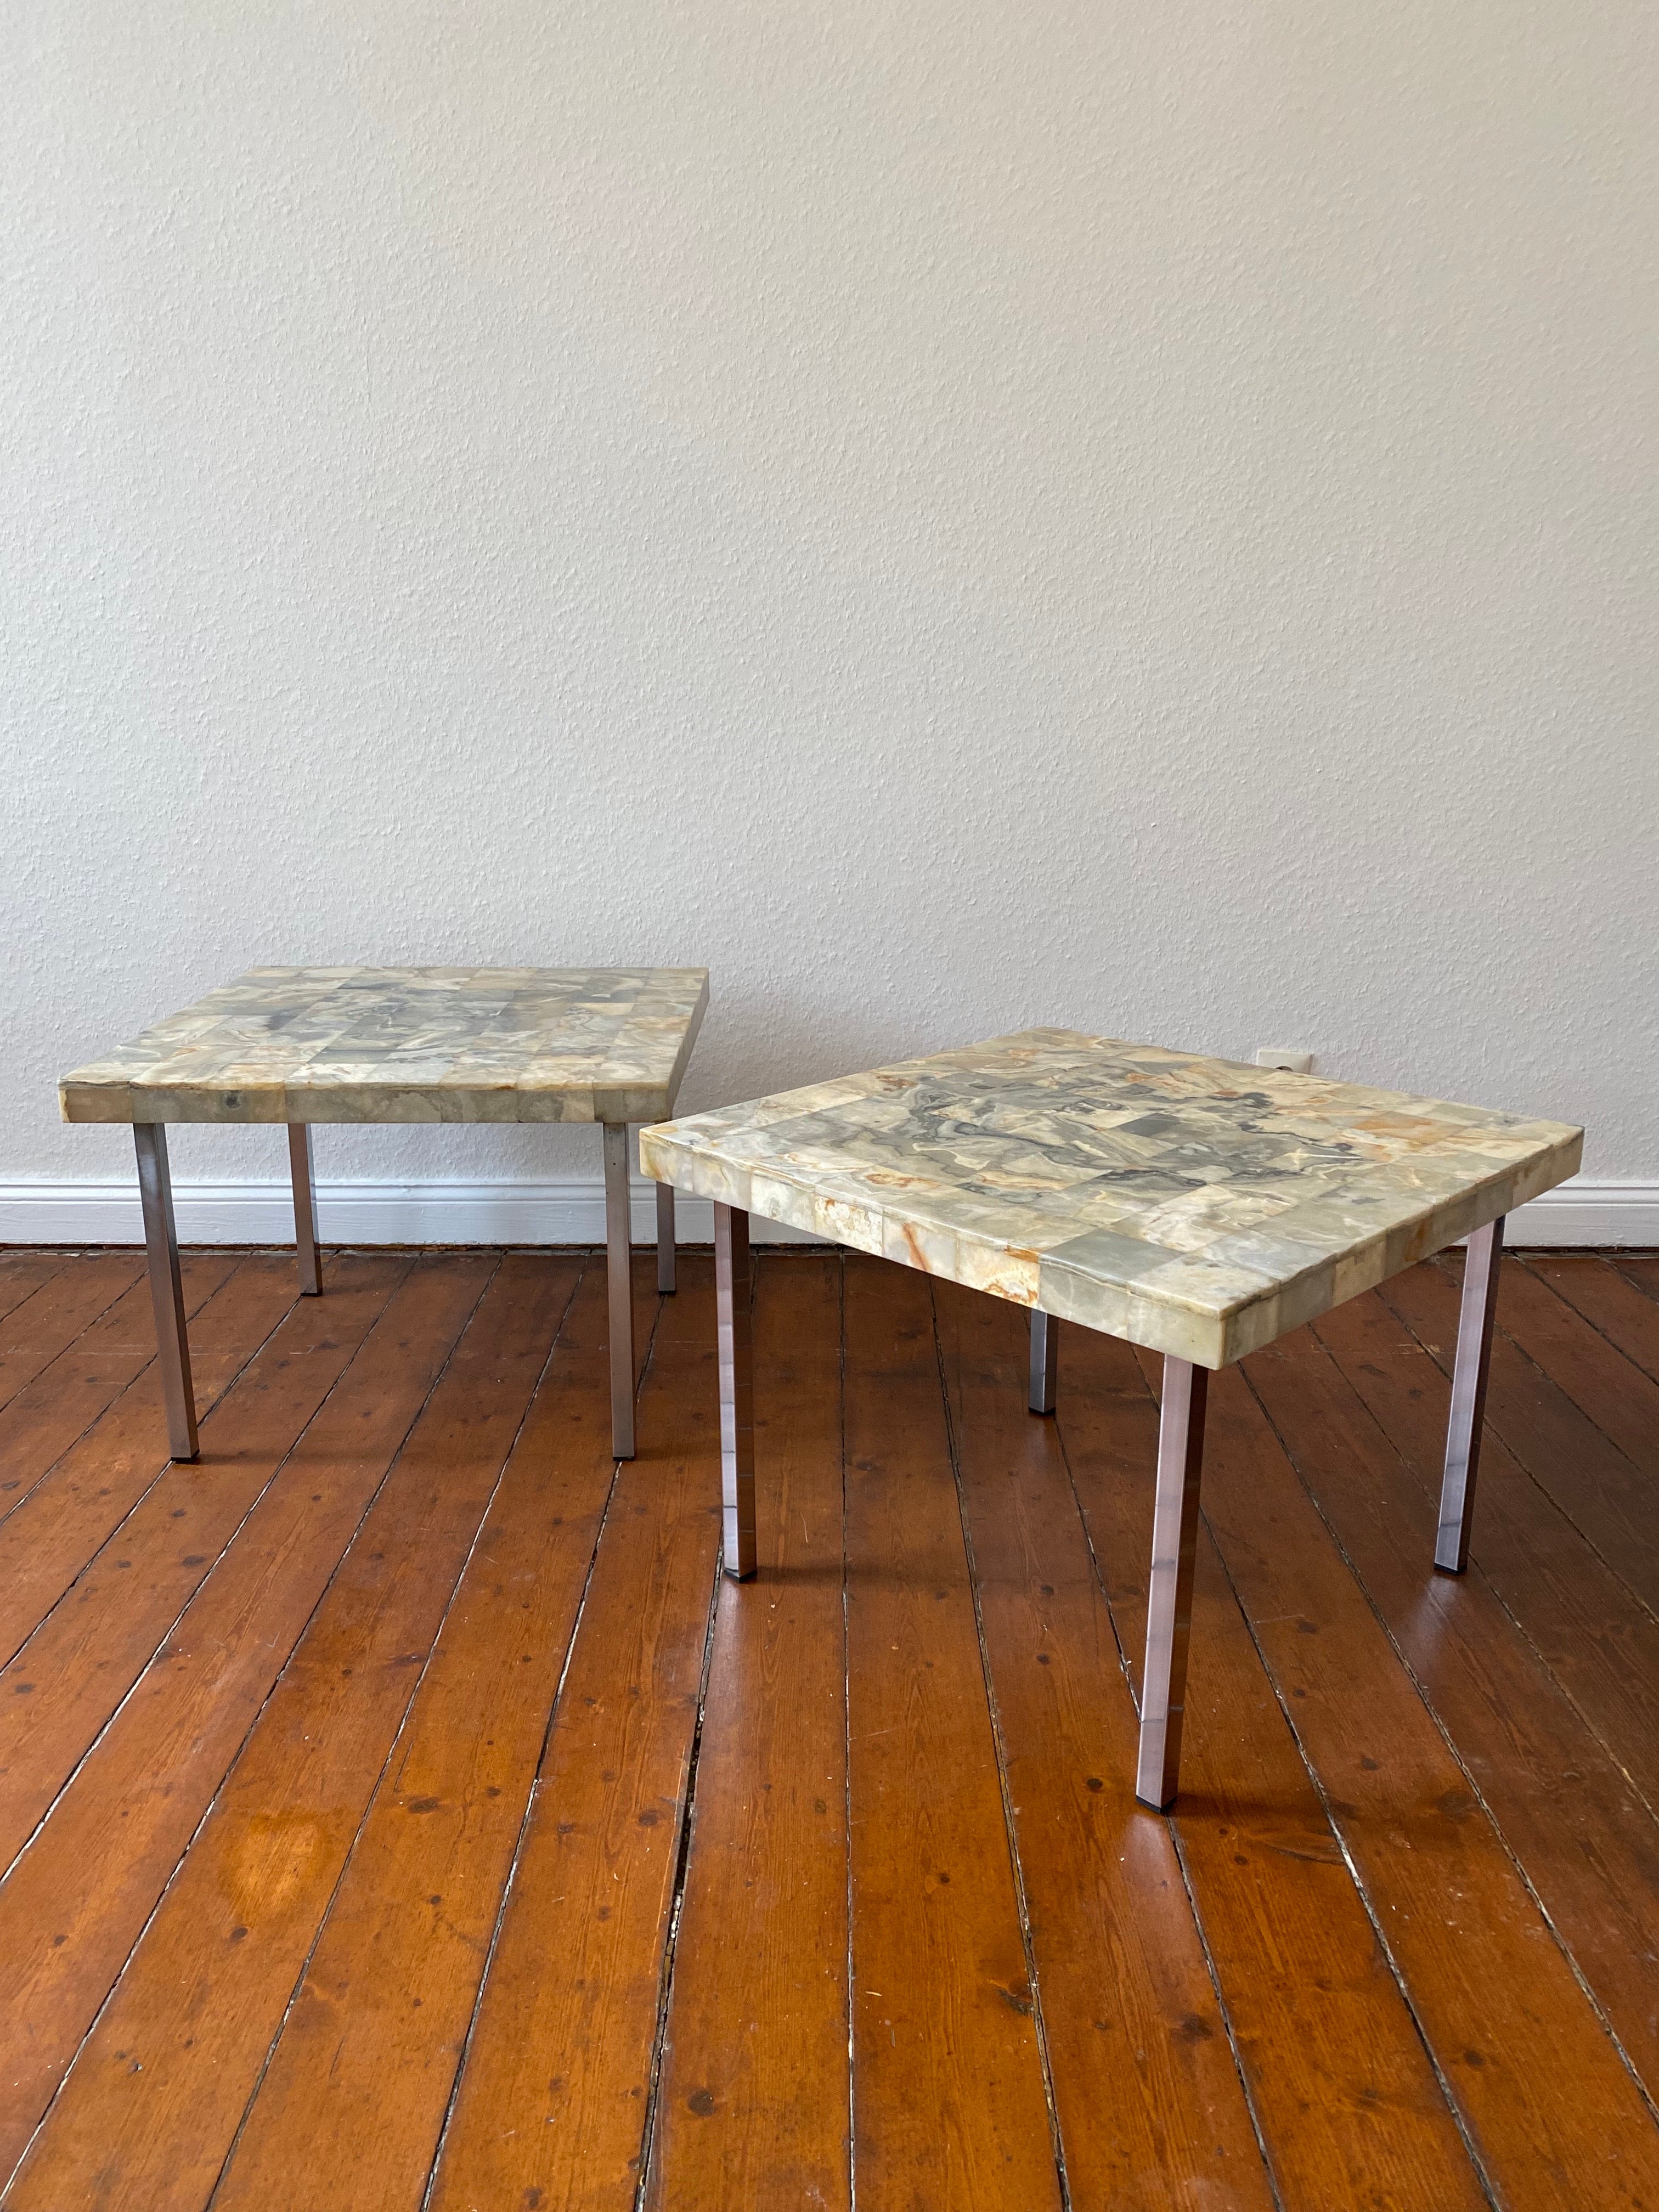 A Set of two rare coffee or End Tables , Model :Kalkutta(Calcutta) by German Sculptor Heinz Lilienthal, 1927-2006.
The design of 64 square mosaic marble pattern combined to one tabletop is exemplary for the fine handcrafted work of this Artist.
The